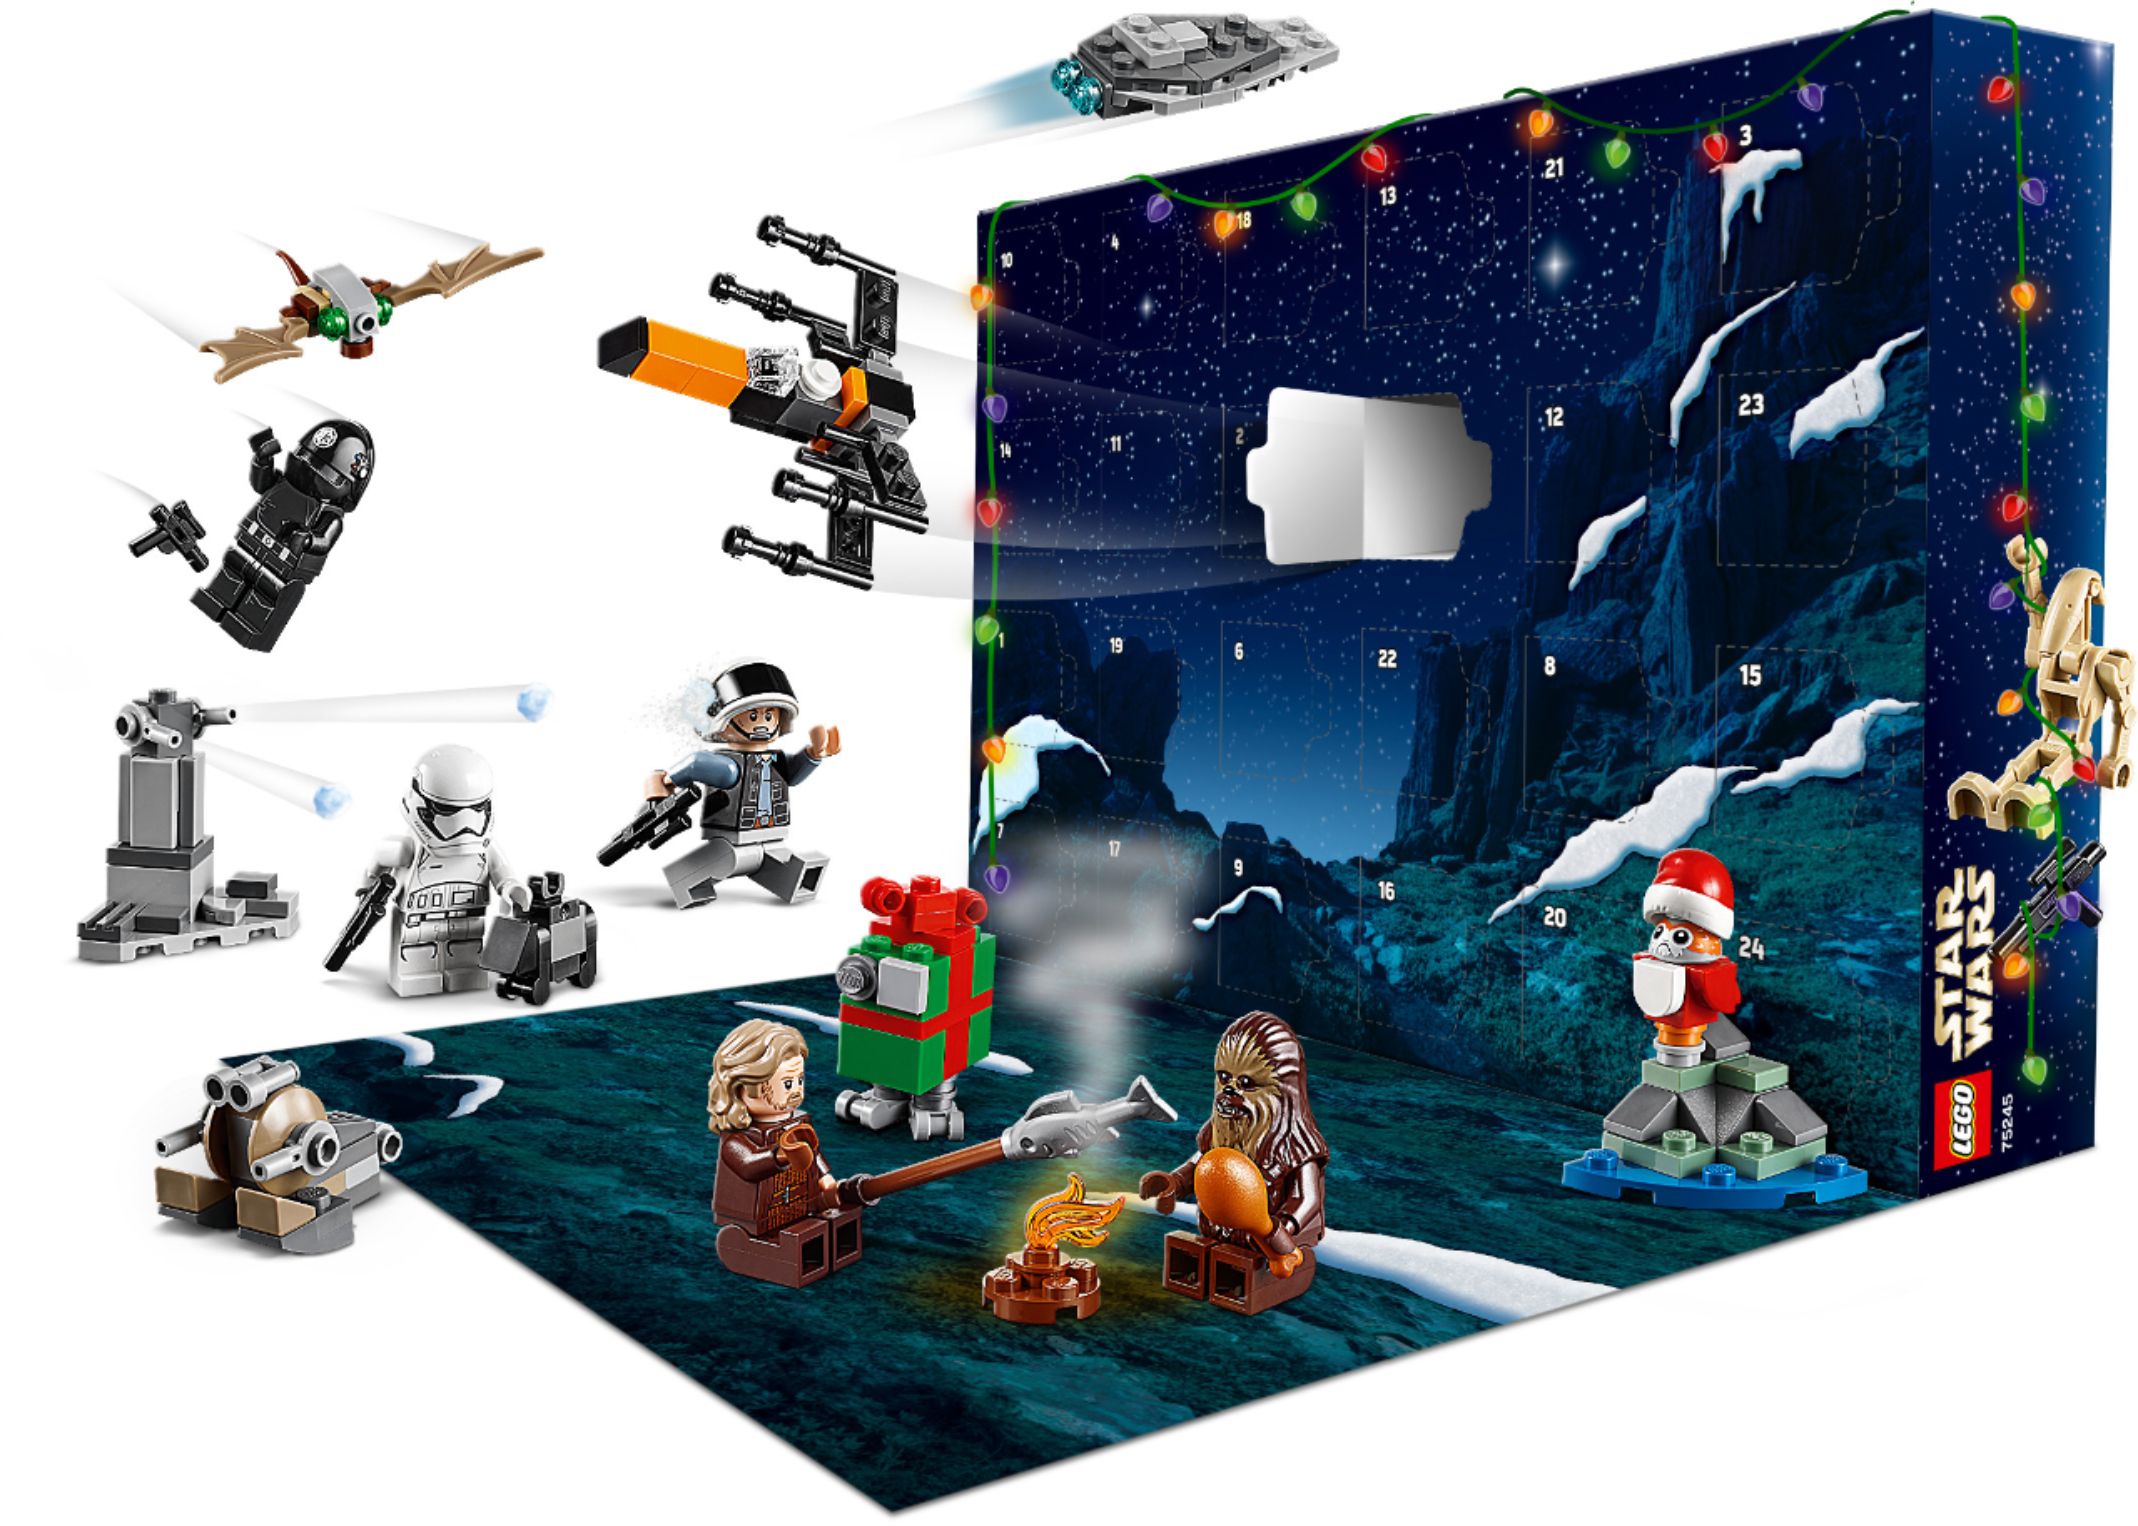 LEGO 75245 Star Wars Advent Calendar 2019 Christmas Countdown Building Set with 24 Buildable Mini Sets plus 6 Minifigures and 4 Droid Figures